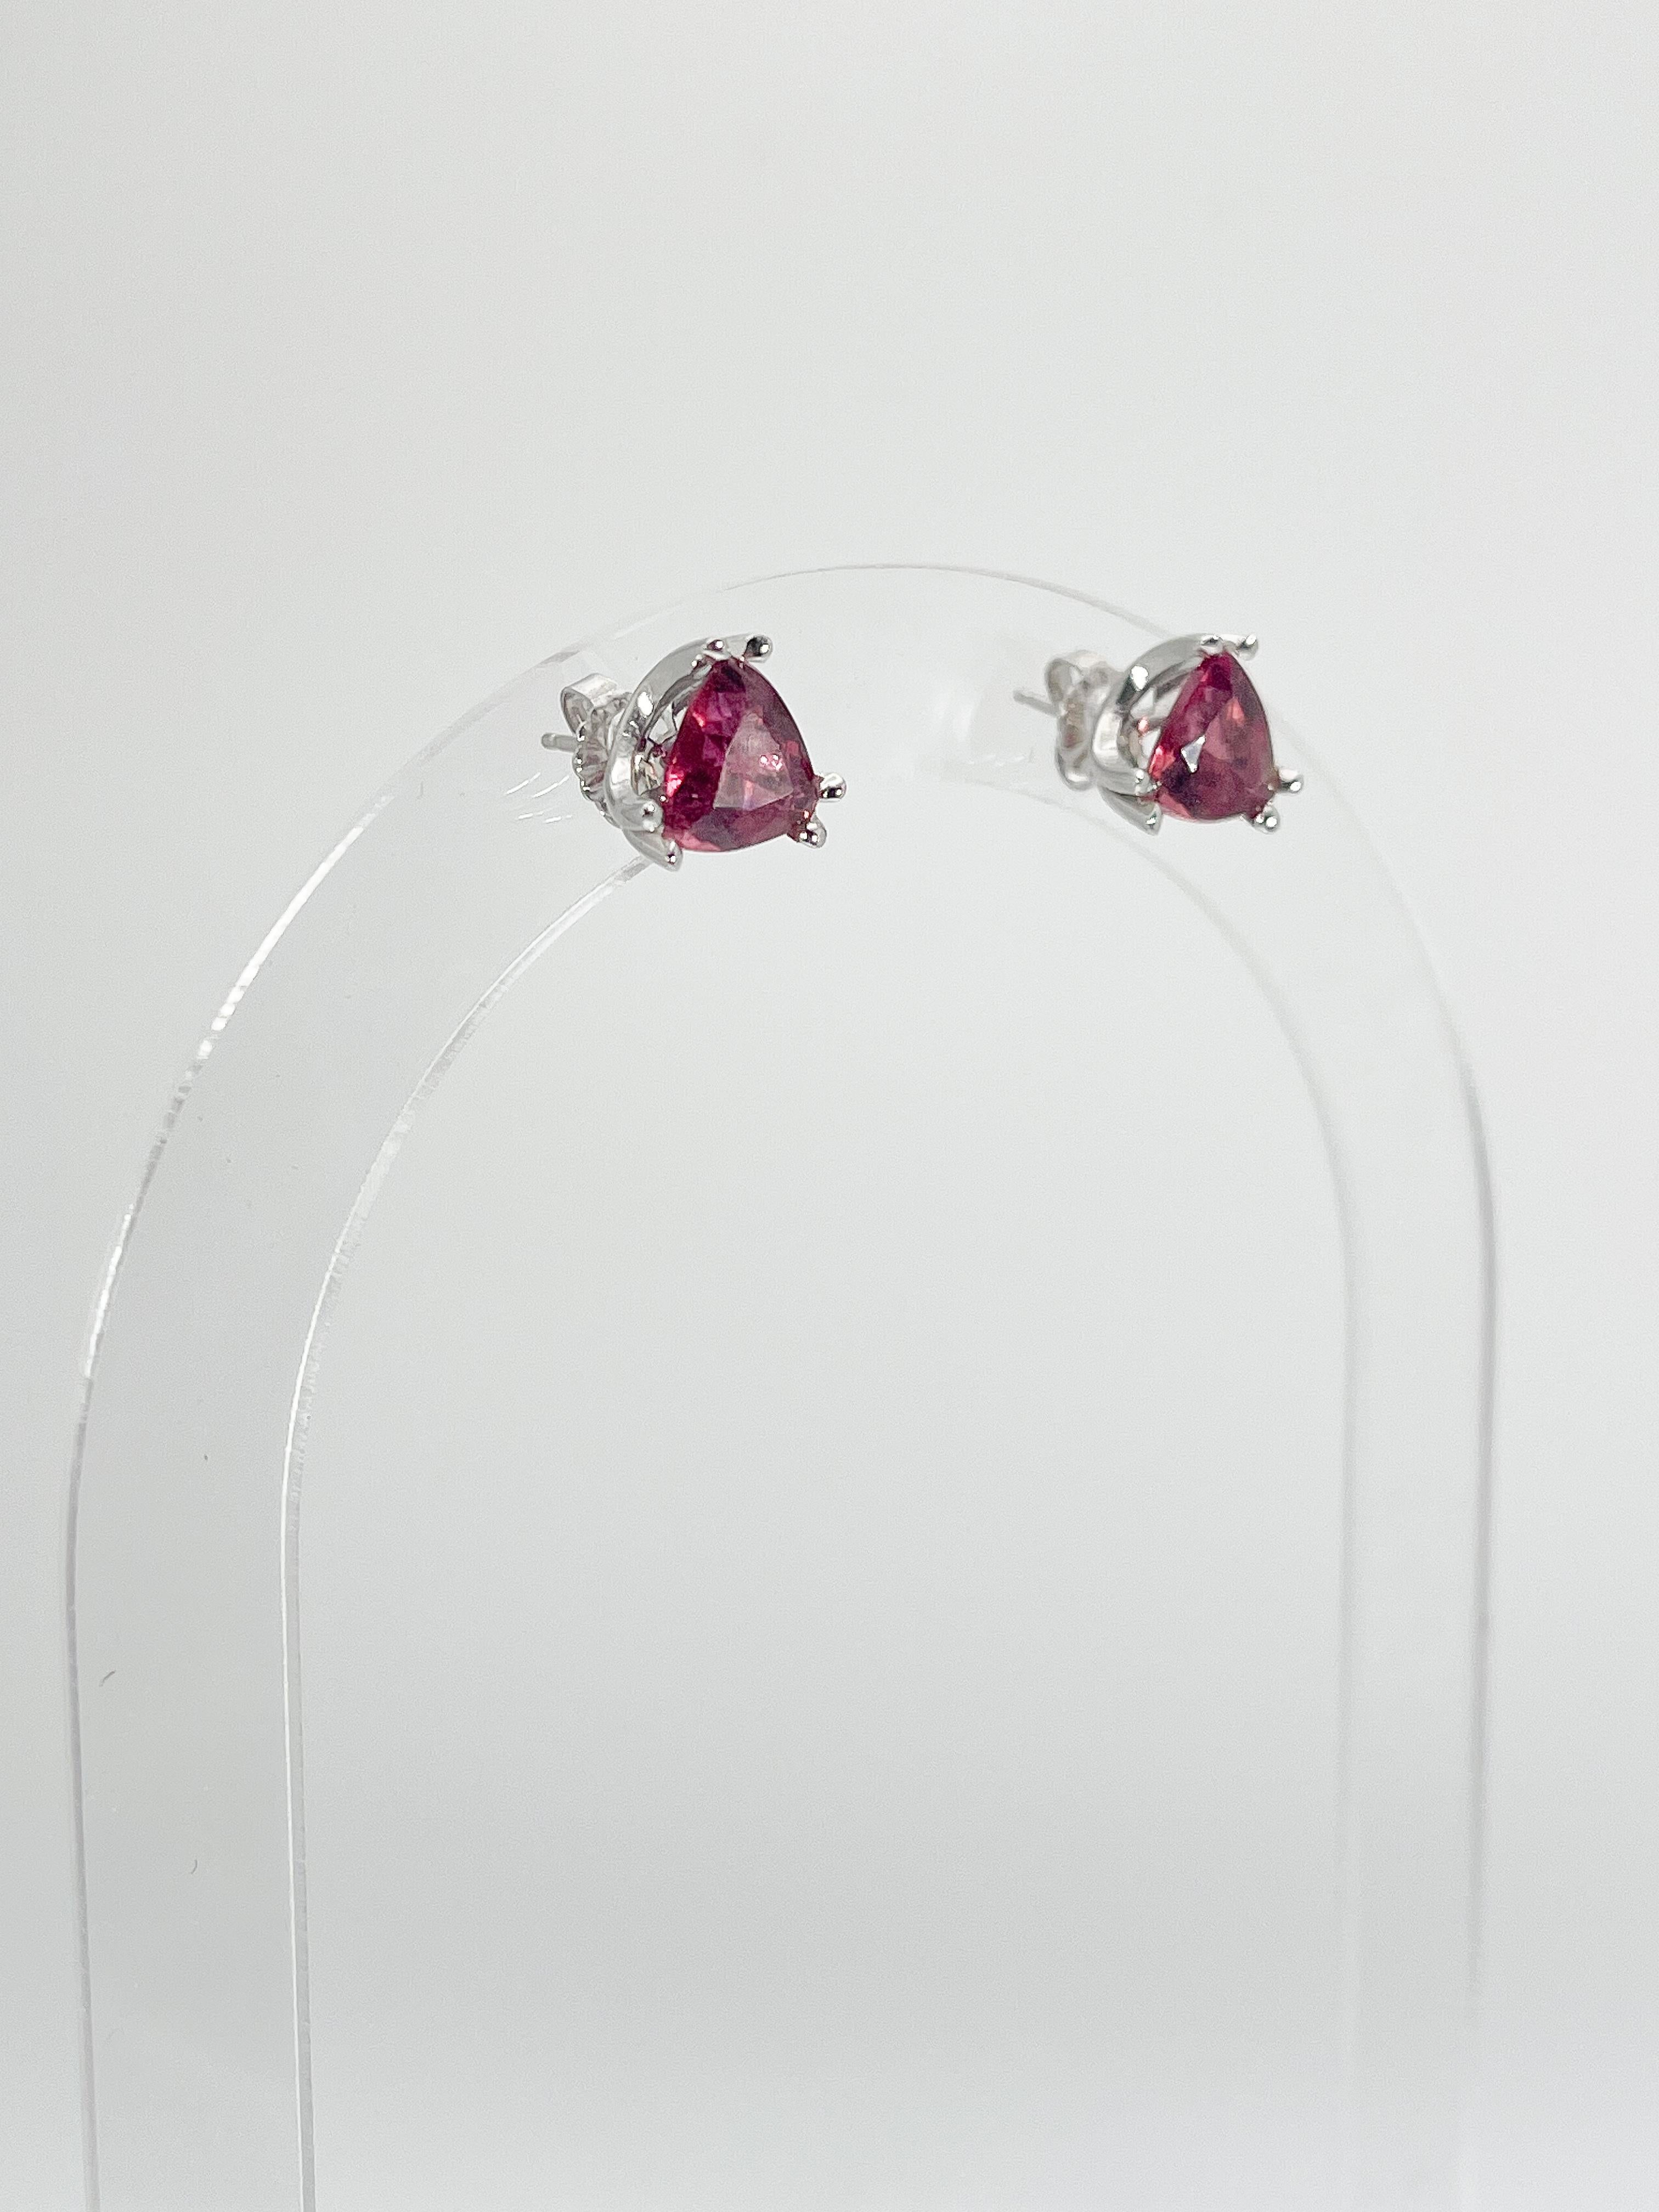 14K White Gold Trillion Pink Tourmaline Double Prong Stud Earrings  In Excellent Condition For Sale In Stuart, FL